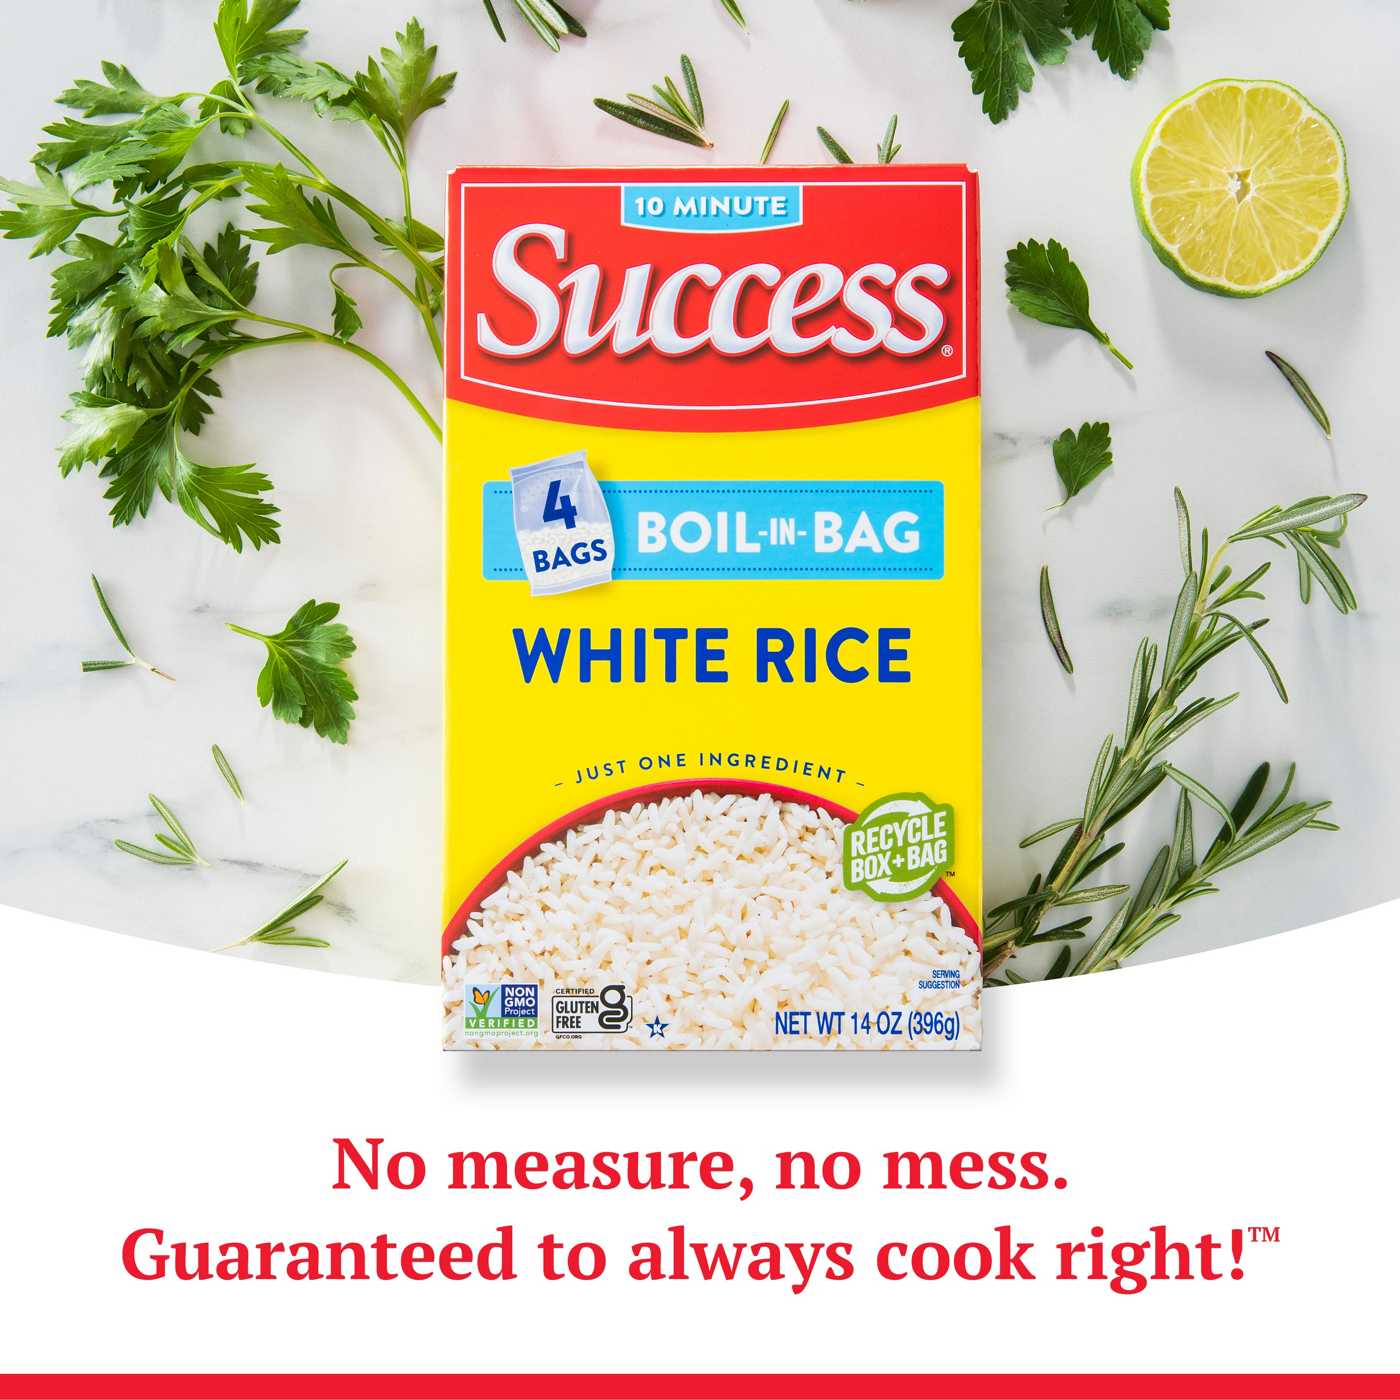 Success Boil-in-Bag White Rice; image 3 of 7